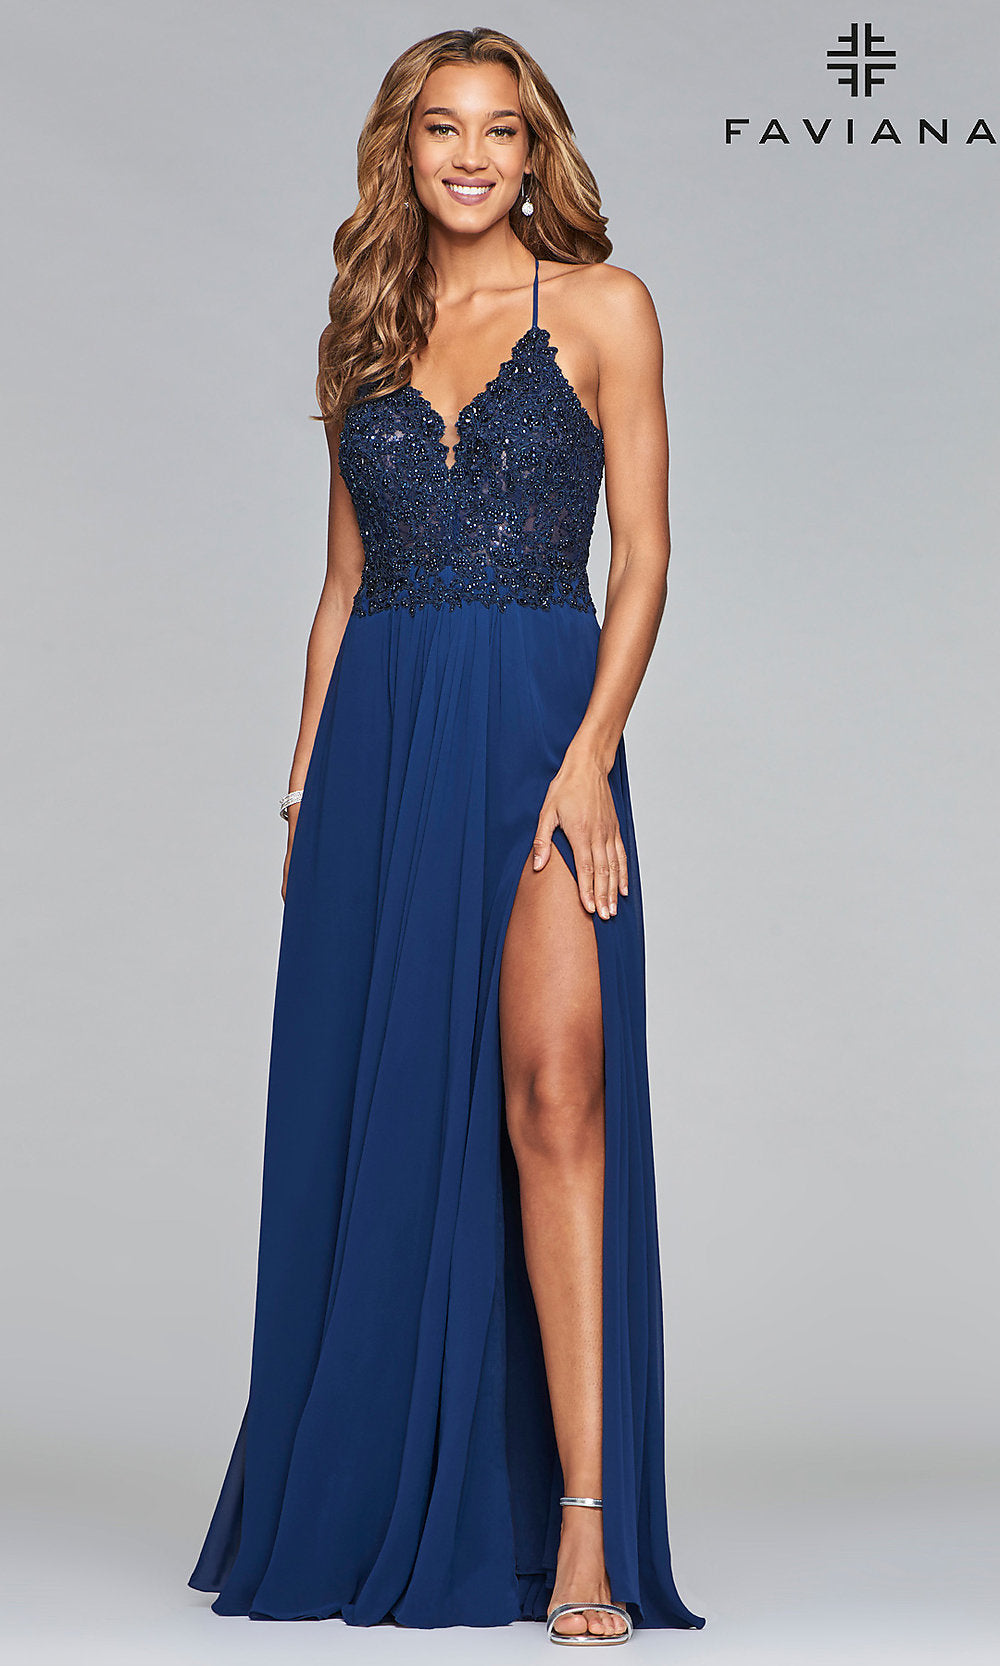 Chiffon Prom Dress with Sheer Embroidered Bodice